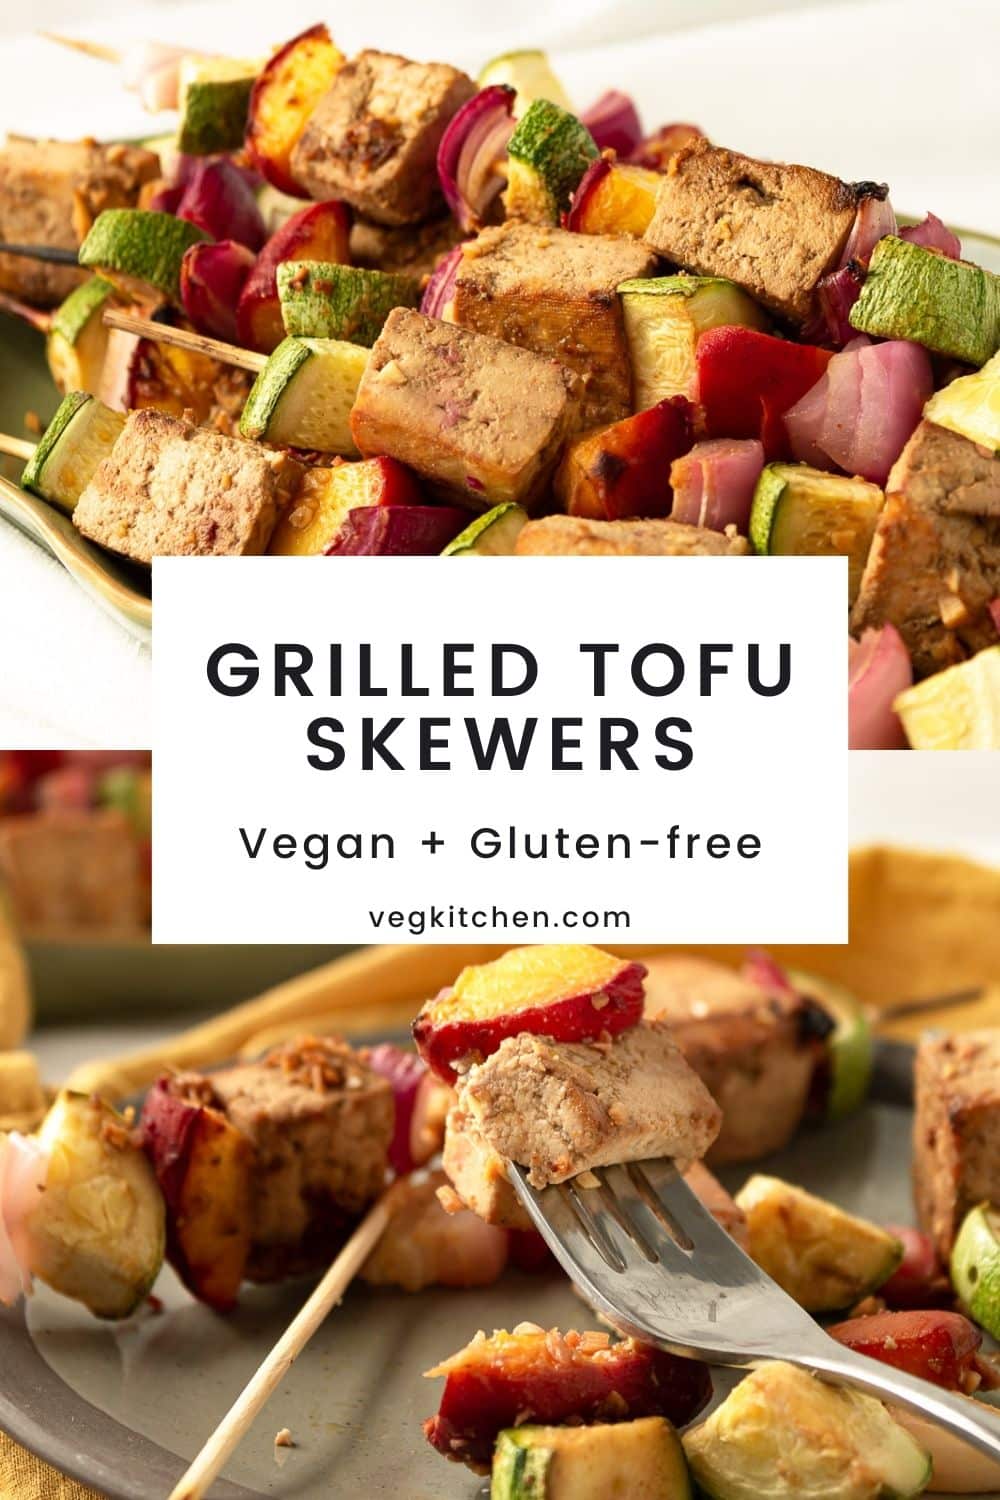 Grilled Tofu Skewers - Vegan recipes by VegKitchen